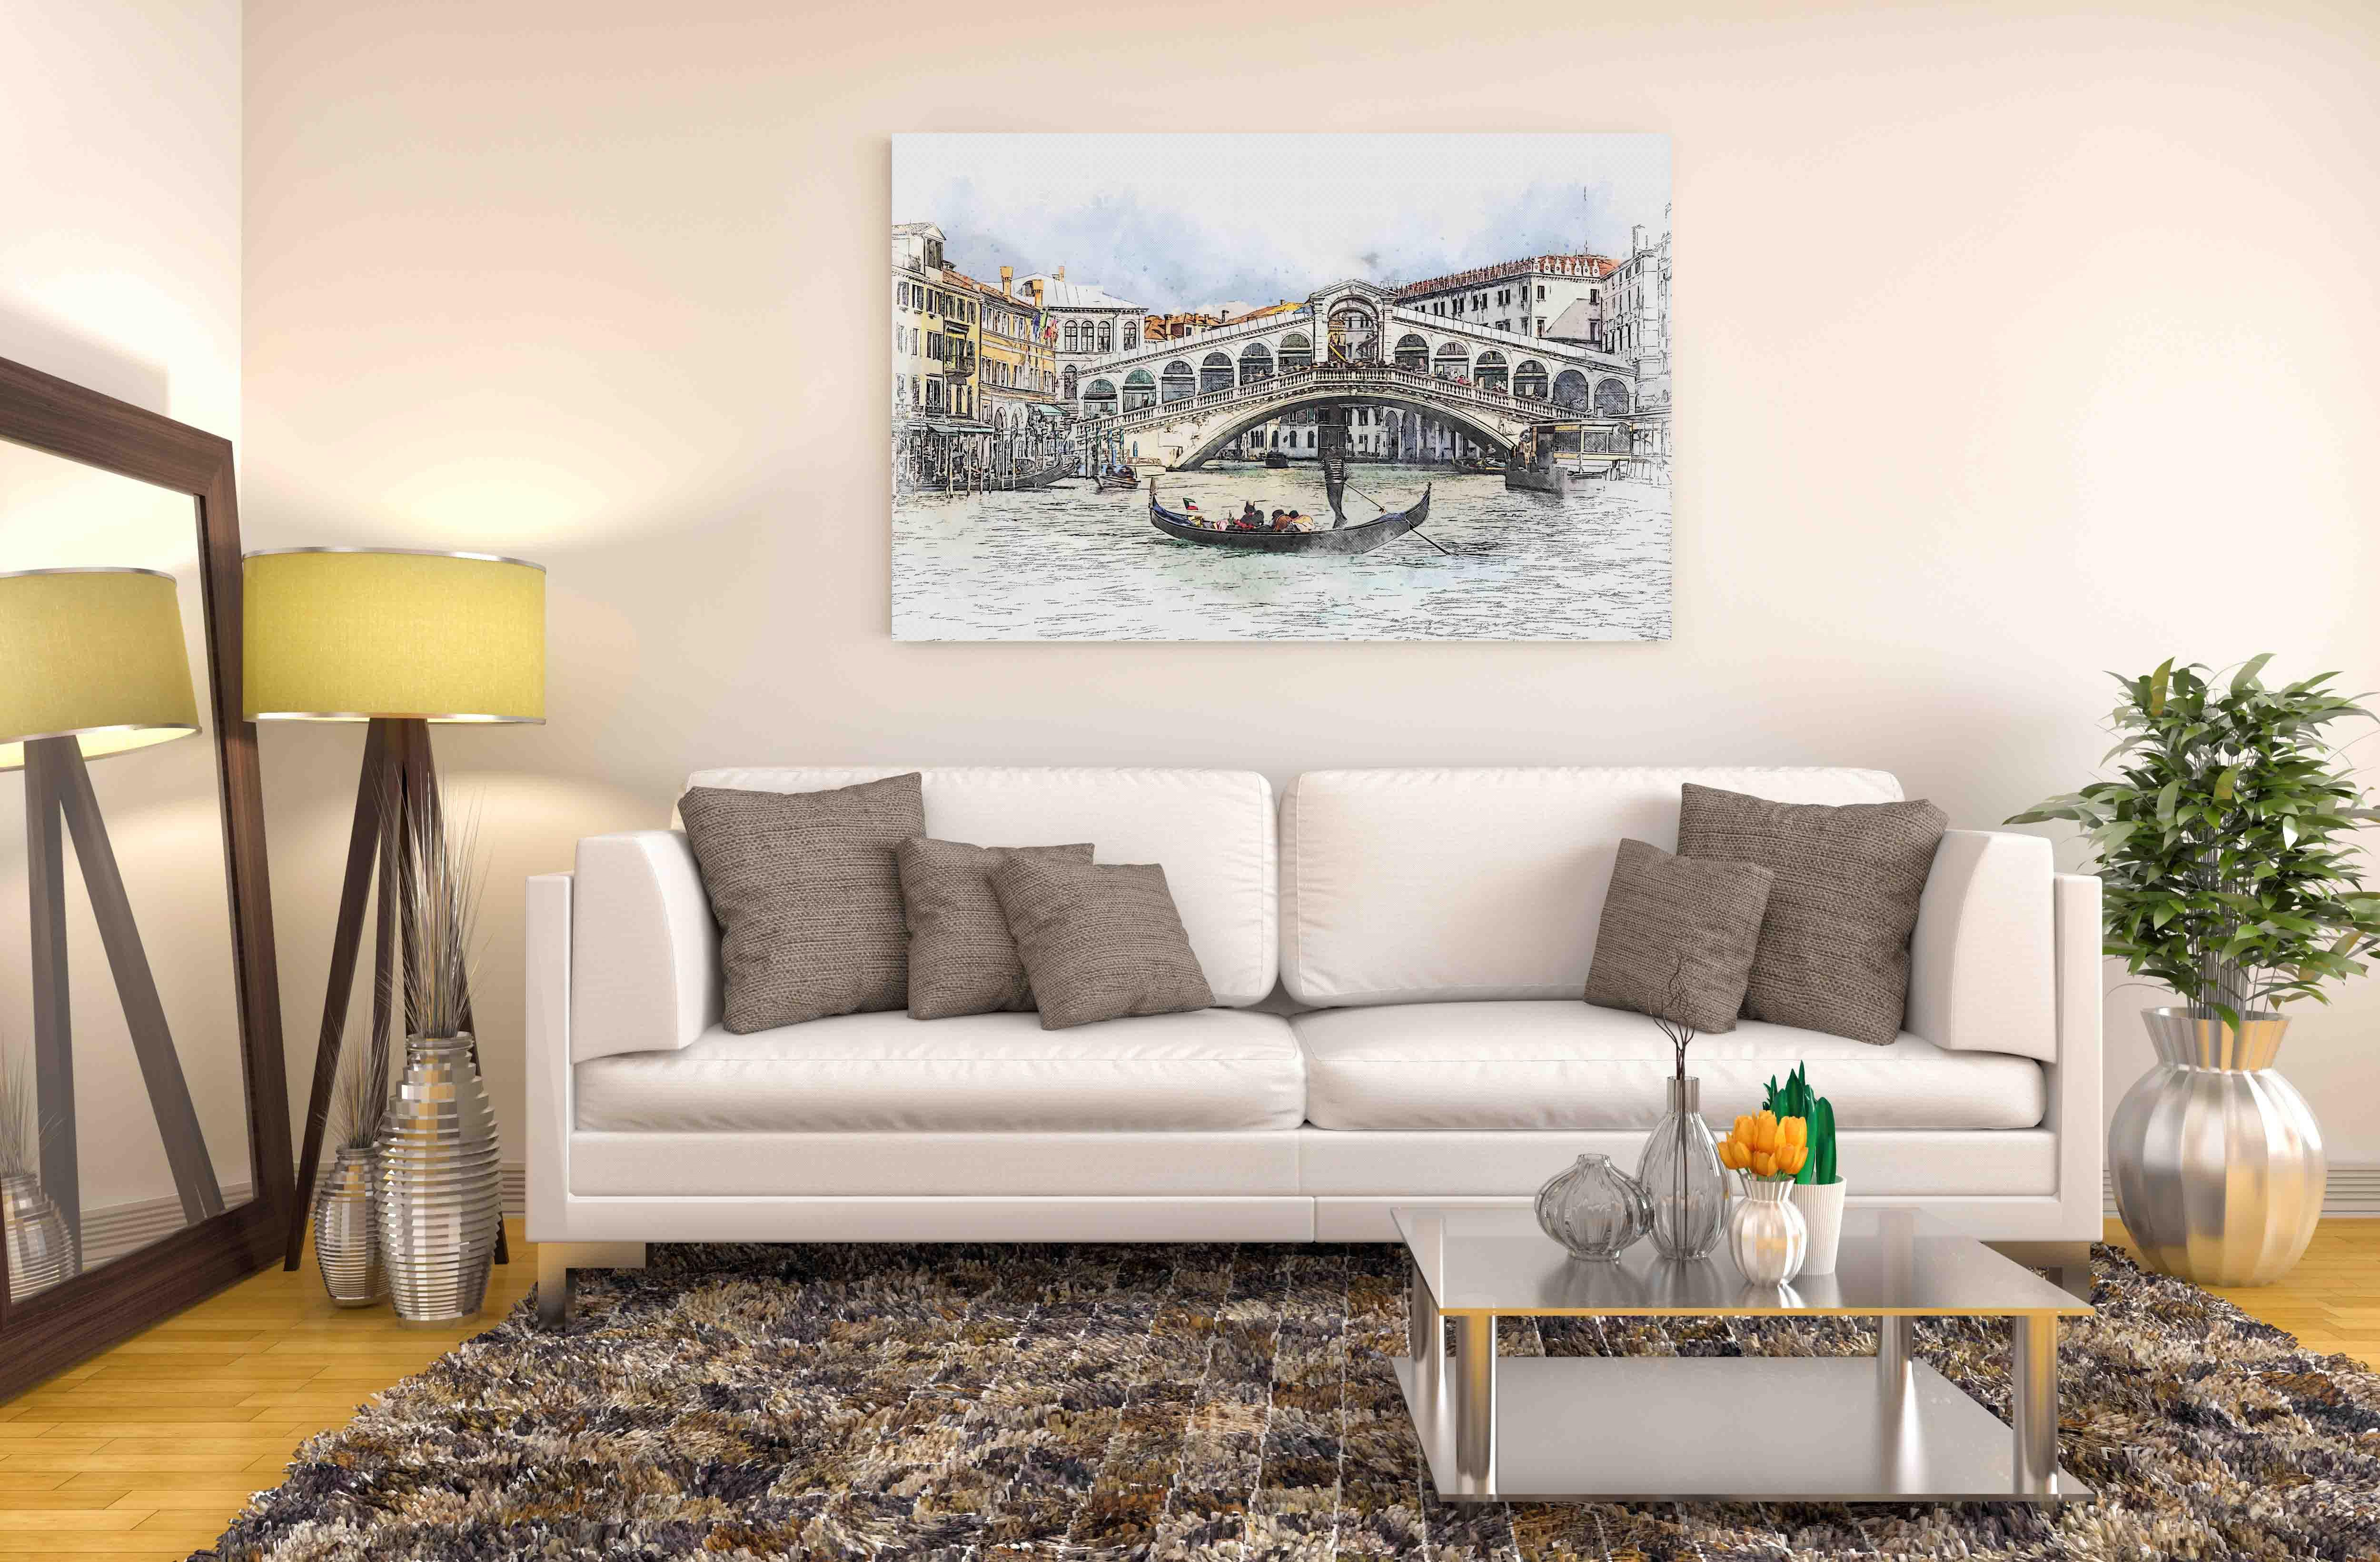 Picture Photo painting on canvas - Boat sails through Venice 2